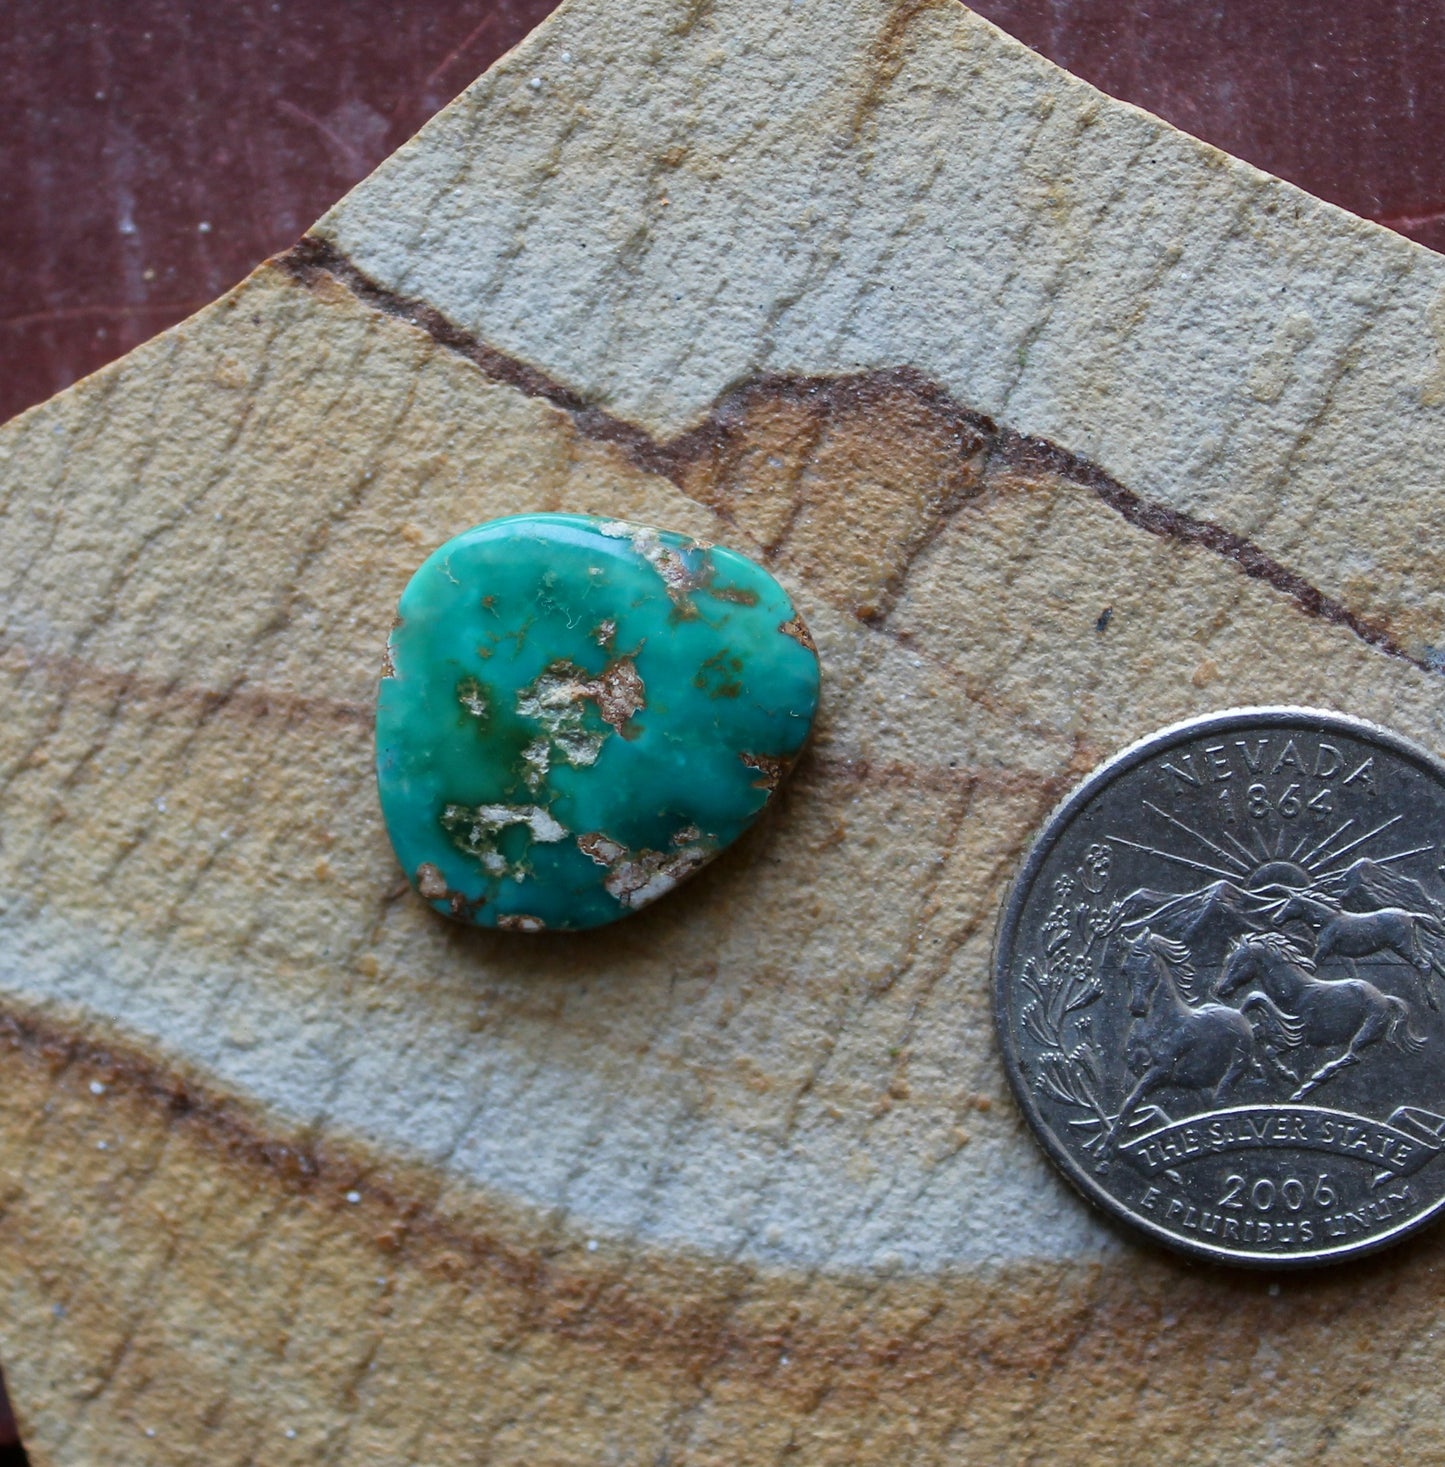 11 carat deep teal Stone Mountain Turquoise cabochon